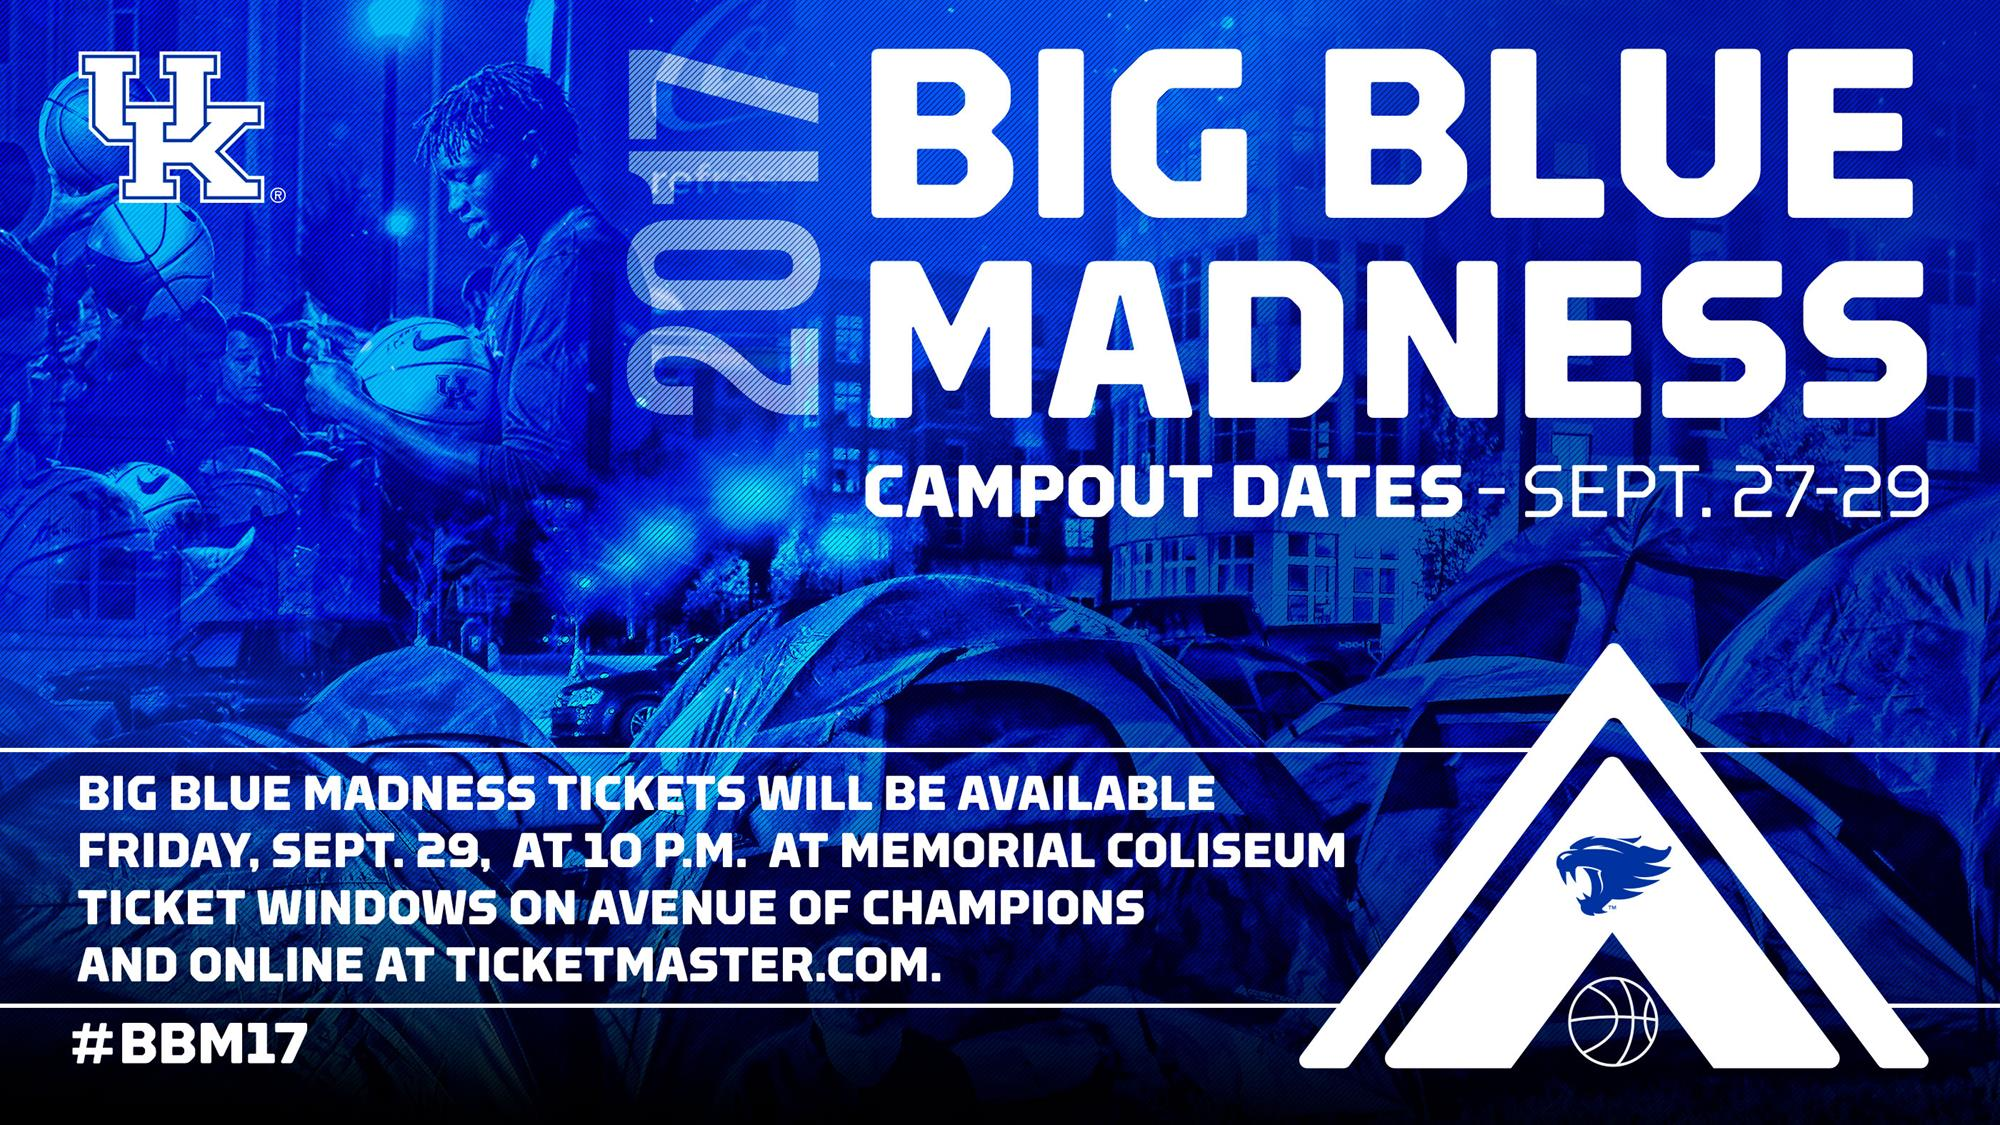 Big Blue Madness Tickets to be Distributed Sept. 29